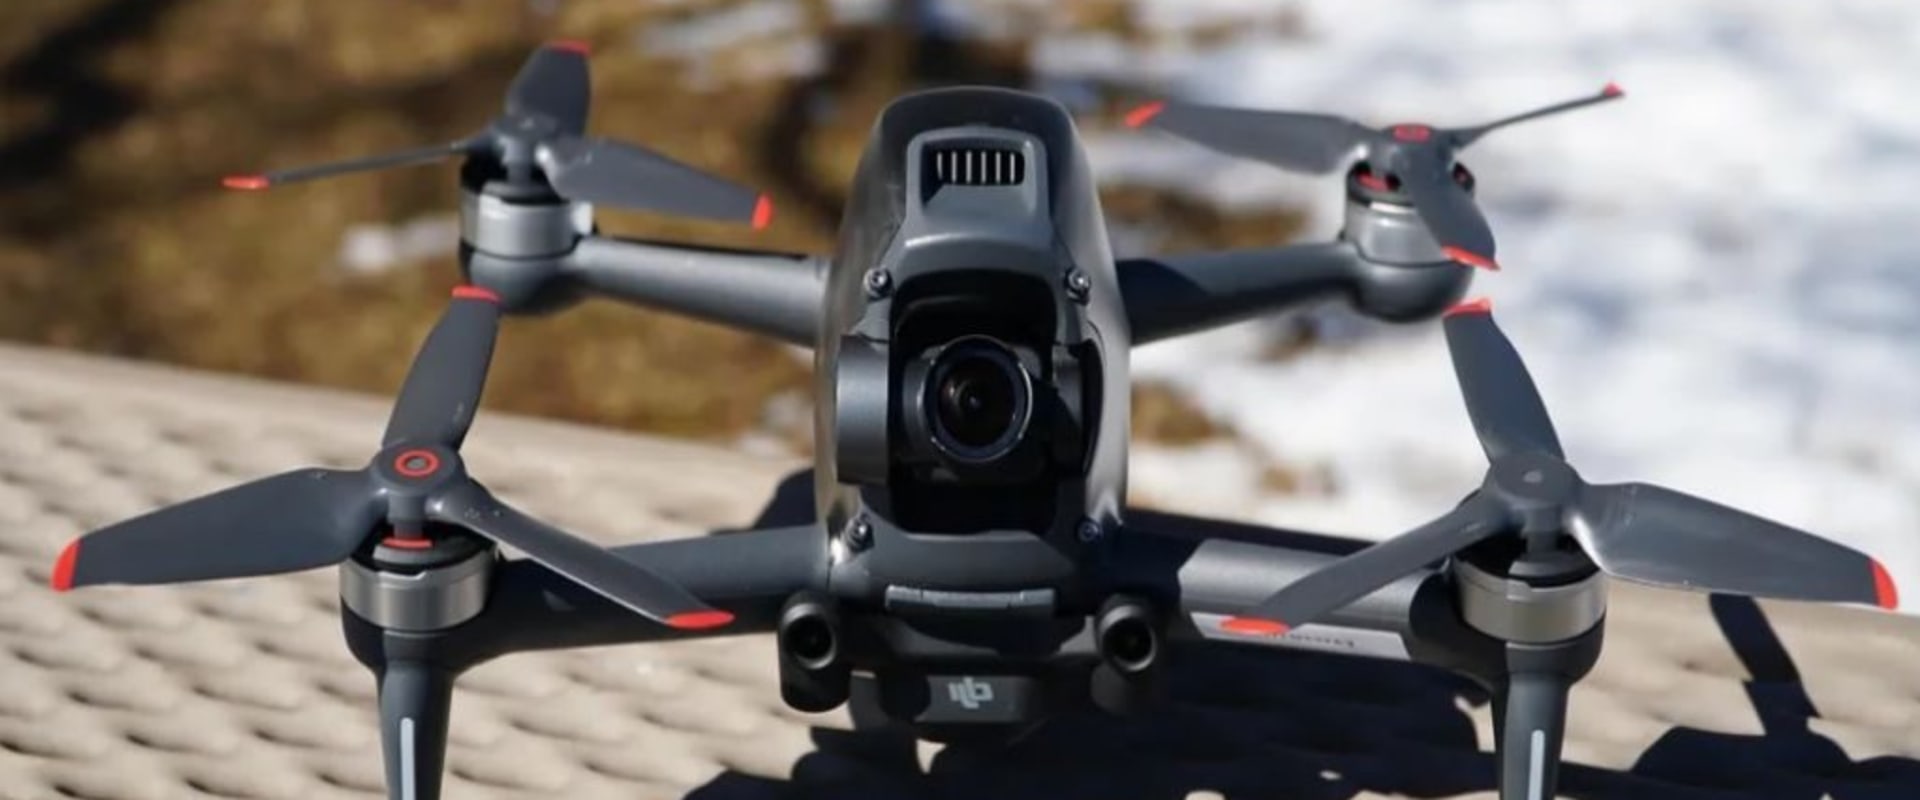 Racing: Uses and Applications of Drones for Recreational Purposes